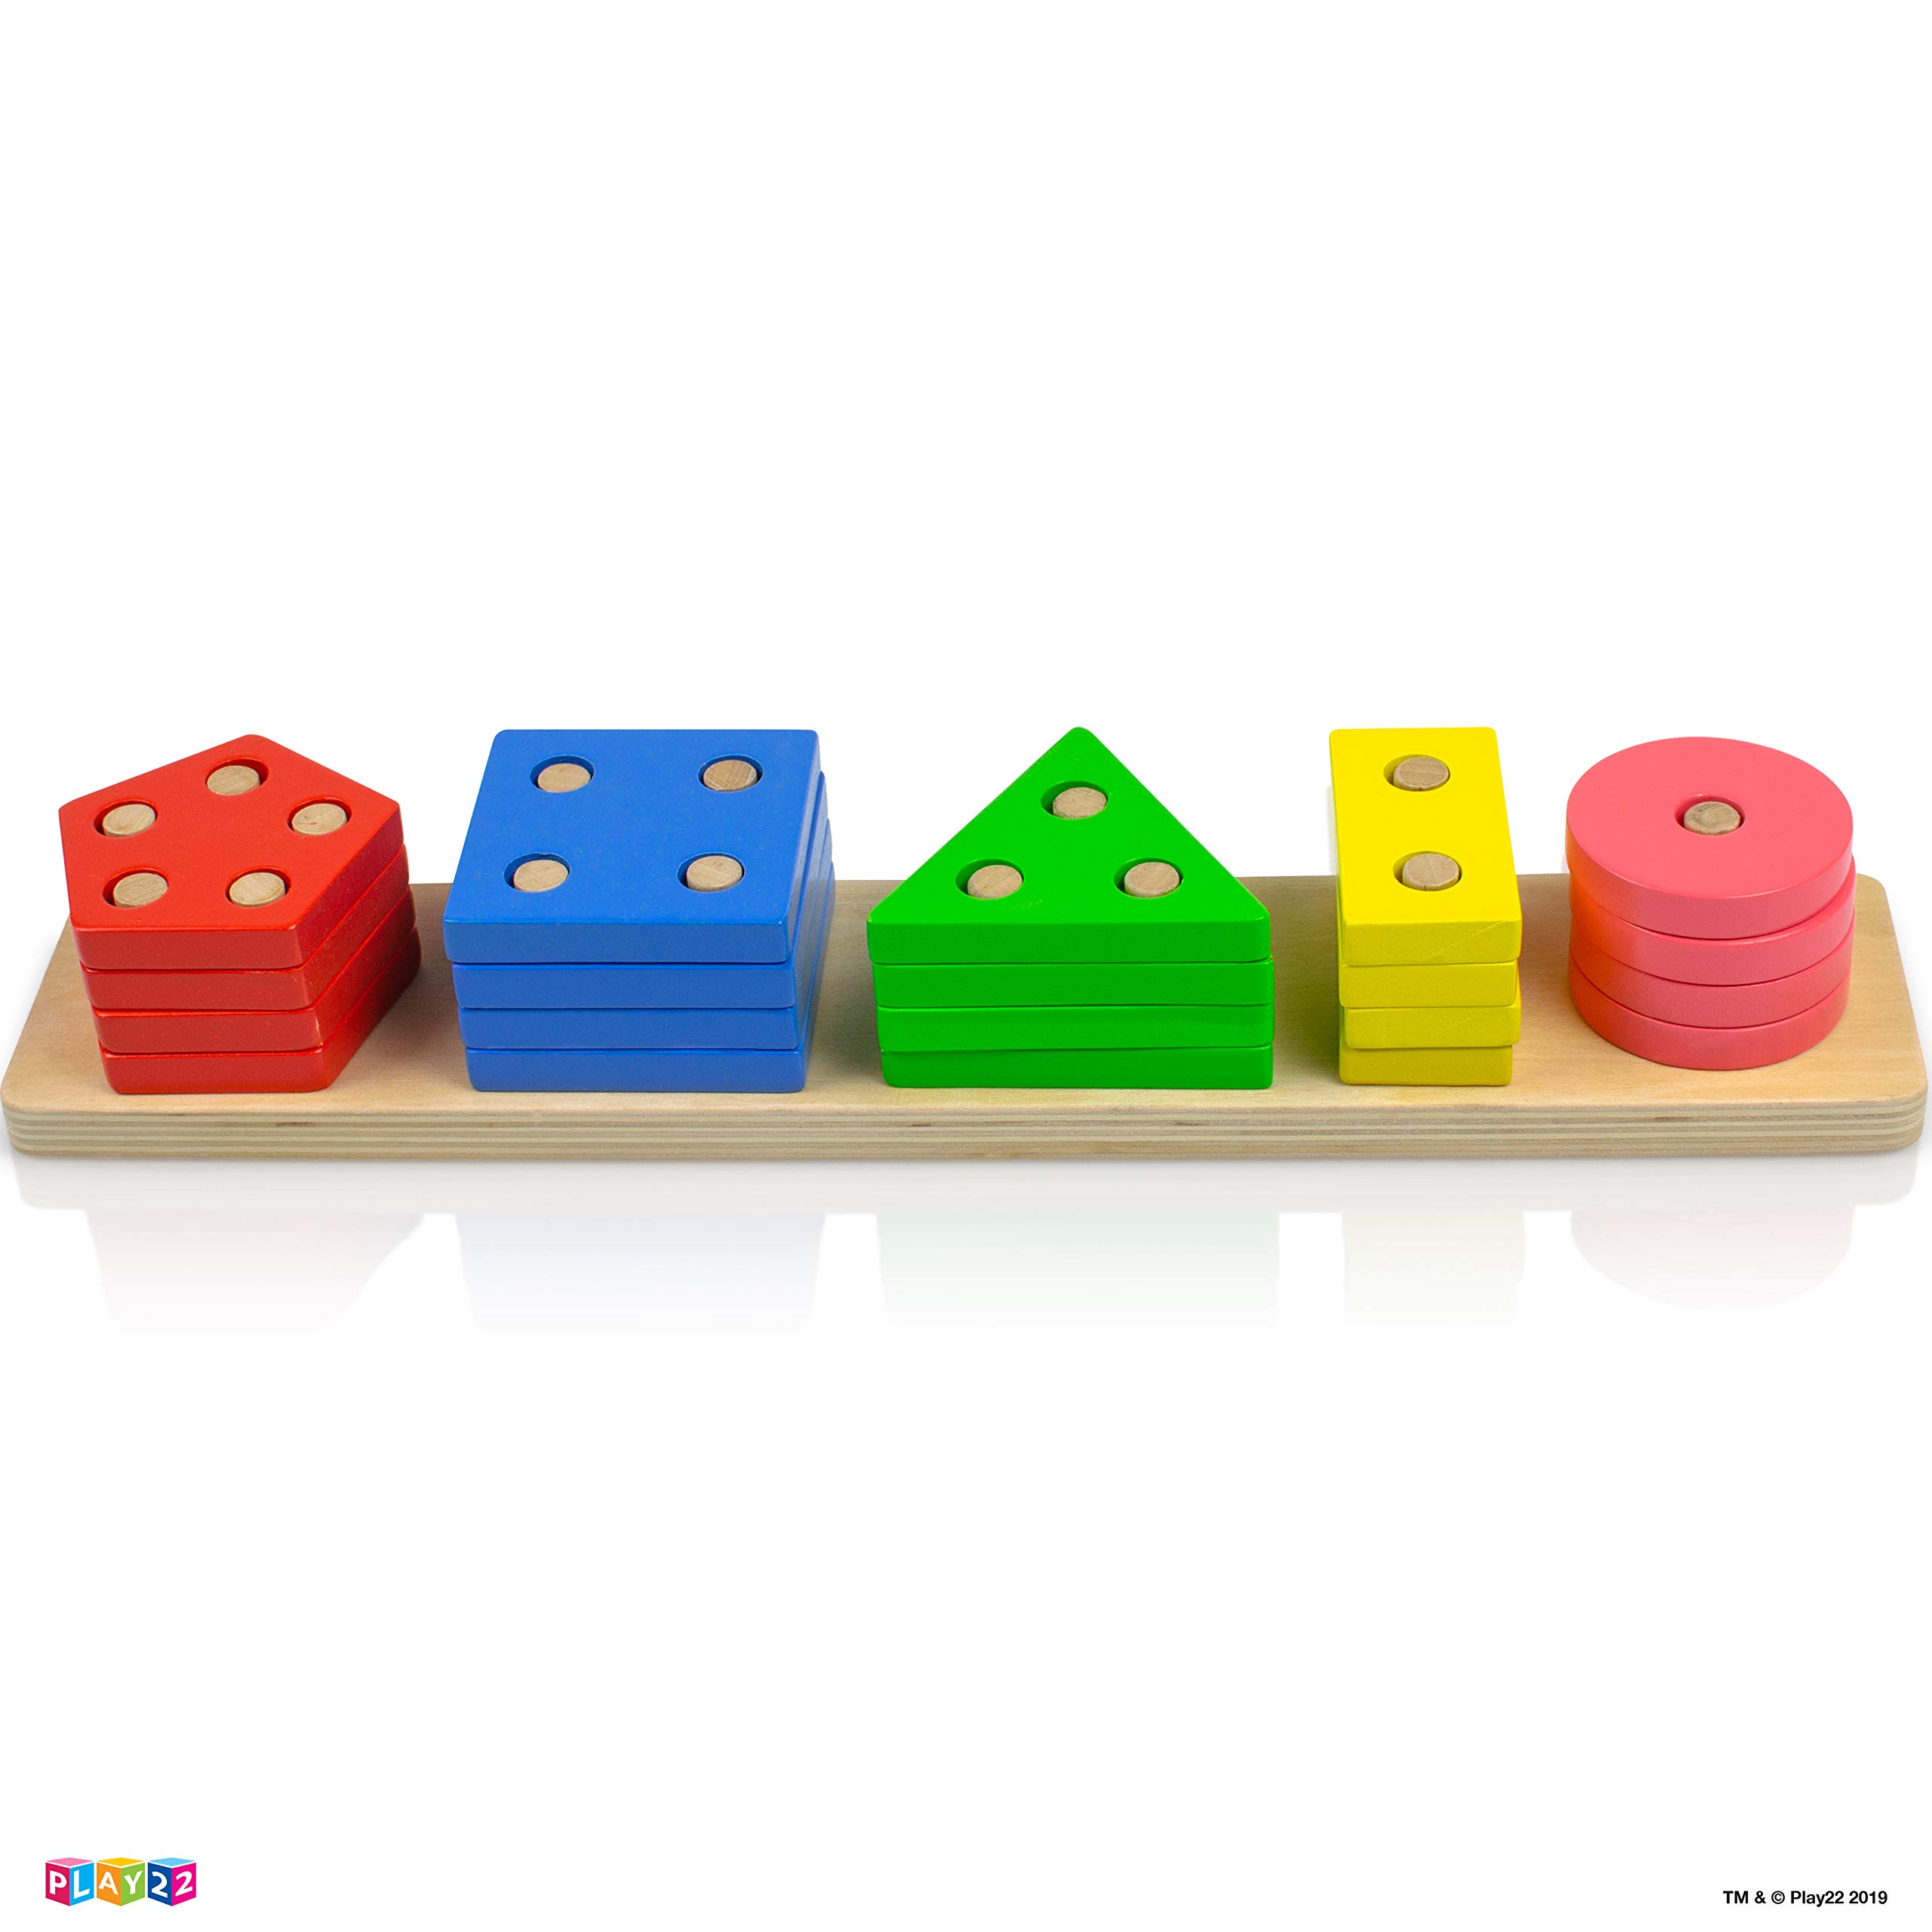 Play22 Montessori Toys for 1 2 3 Years Old Toddlers Boys Girls - Wooden Sorting & Stacking Educational Kids Learning Toys Color Recognition Stack and Sort 20Pc, Great Gift – Original